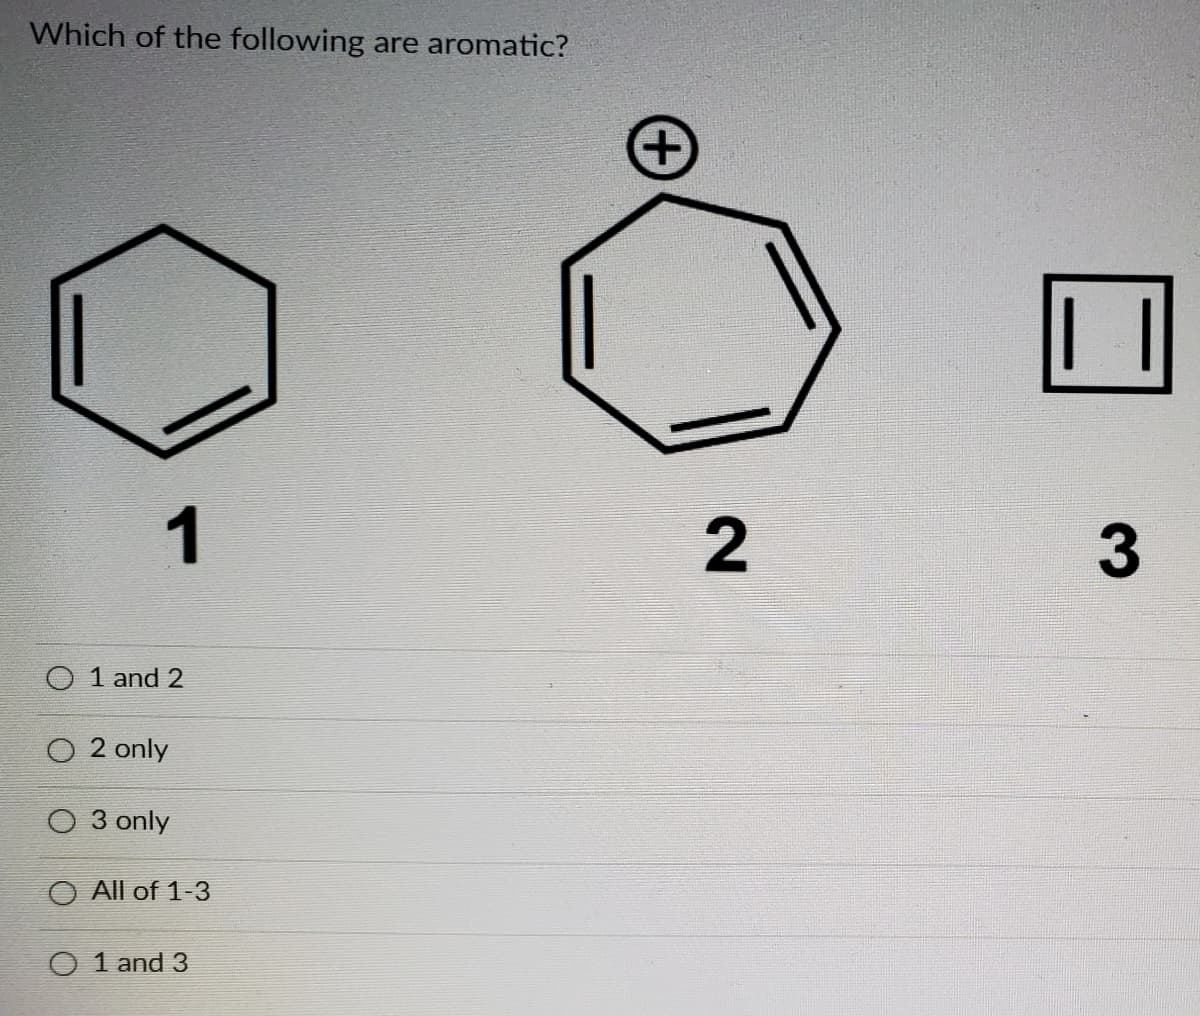 Which of the following are aromatic?
1
O 1 and 2
2 only
O 3 only
All of 1-3
O 1 and 3
